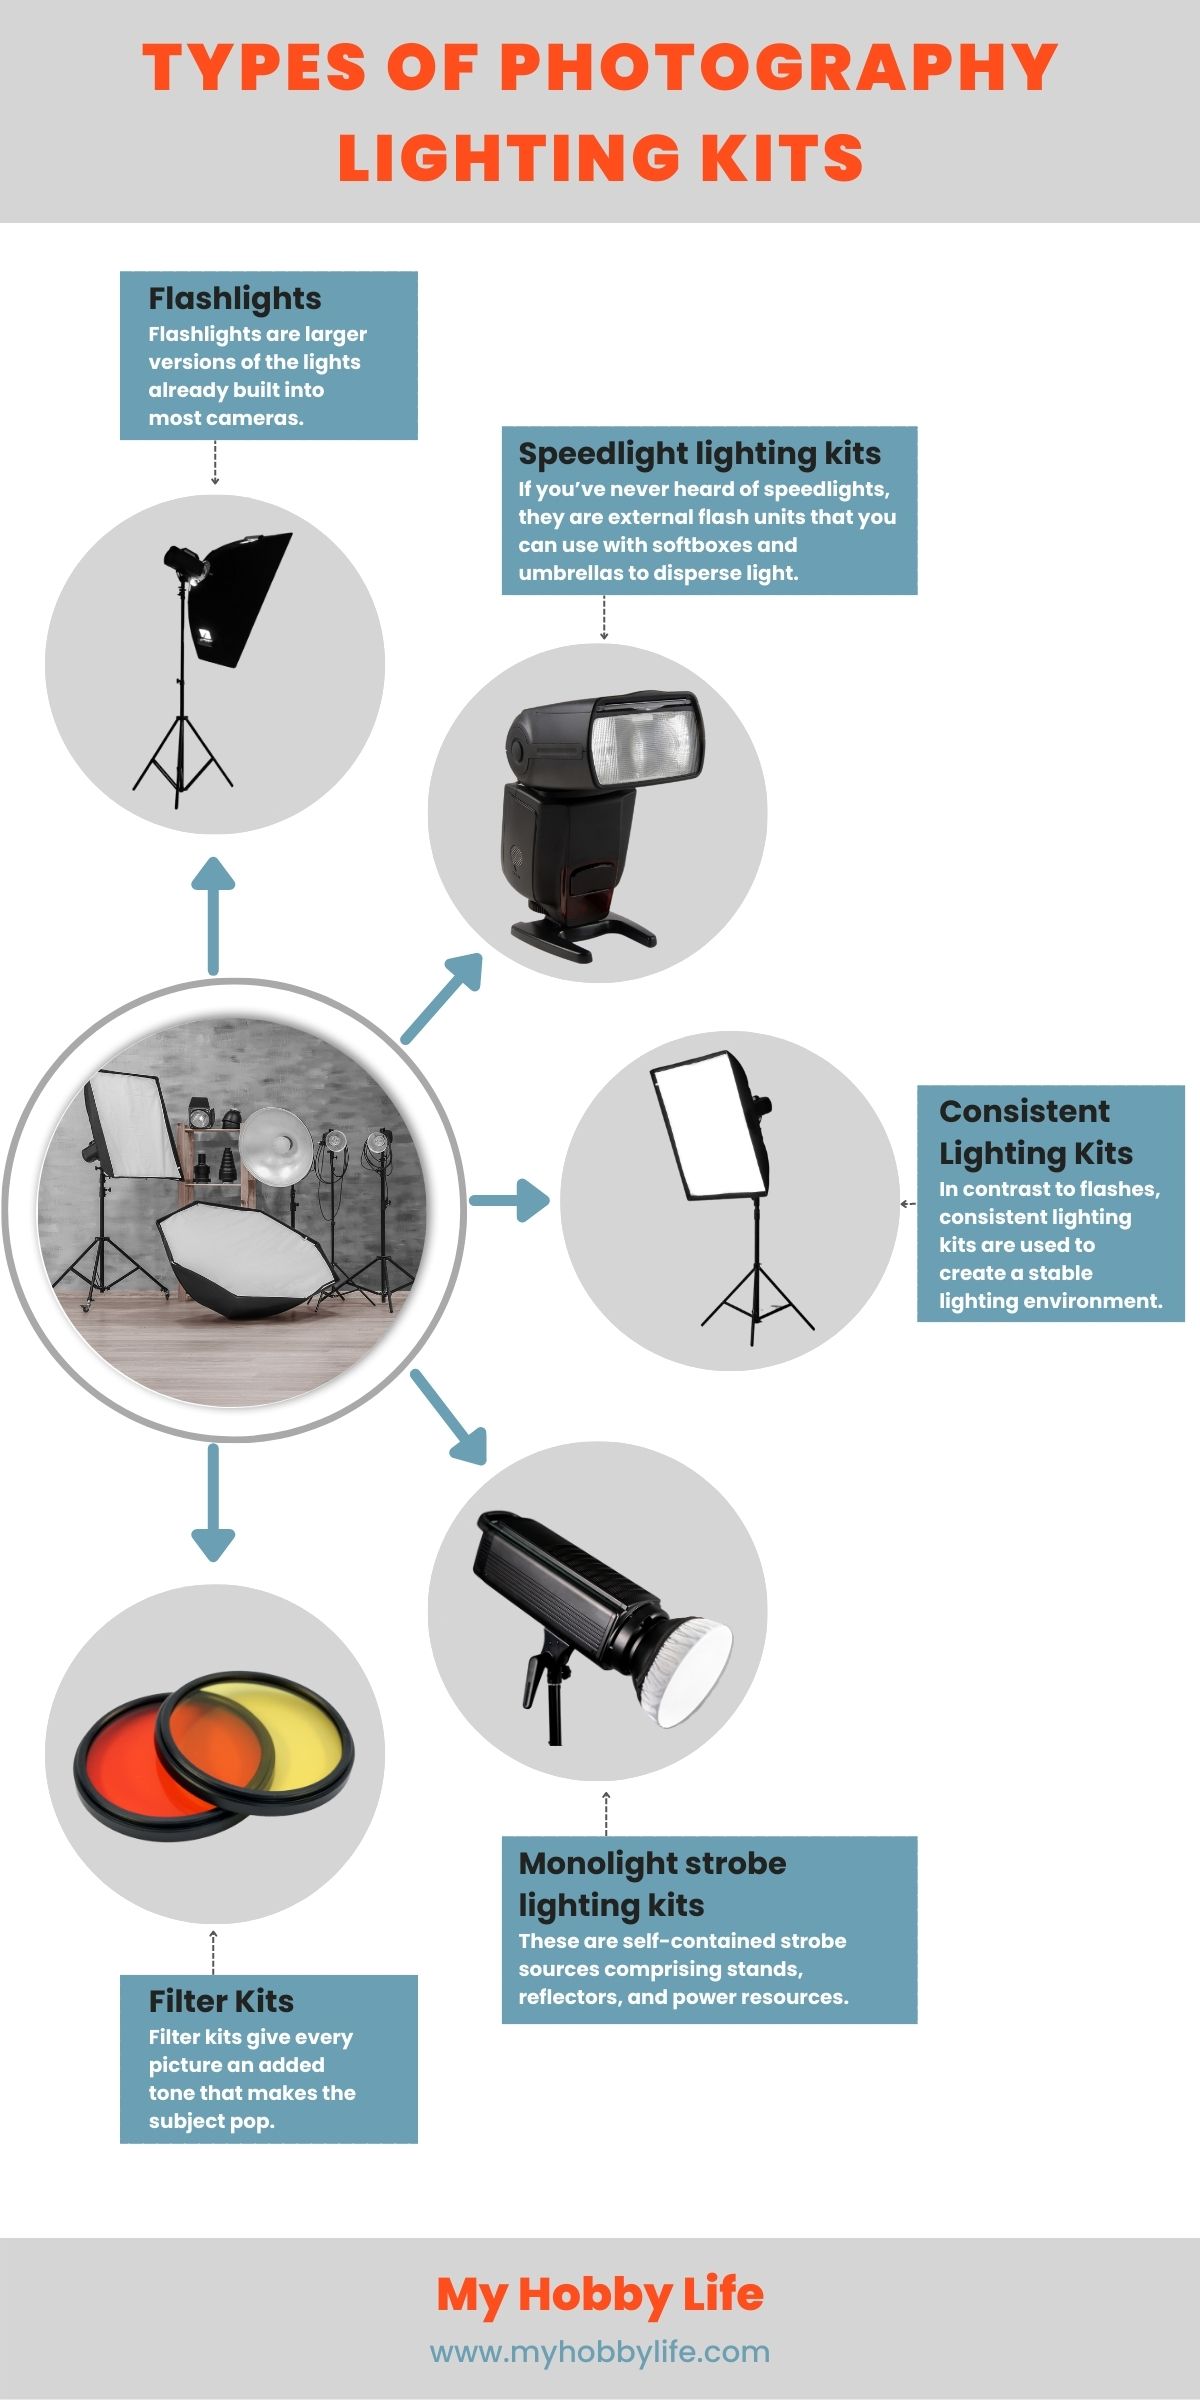 Types of photography lighting kits